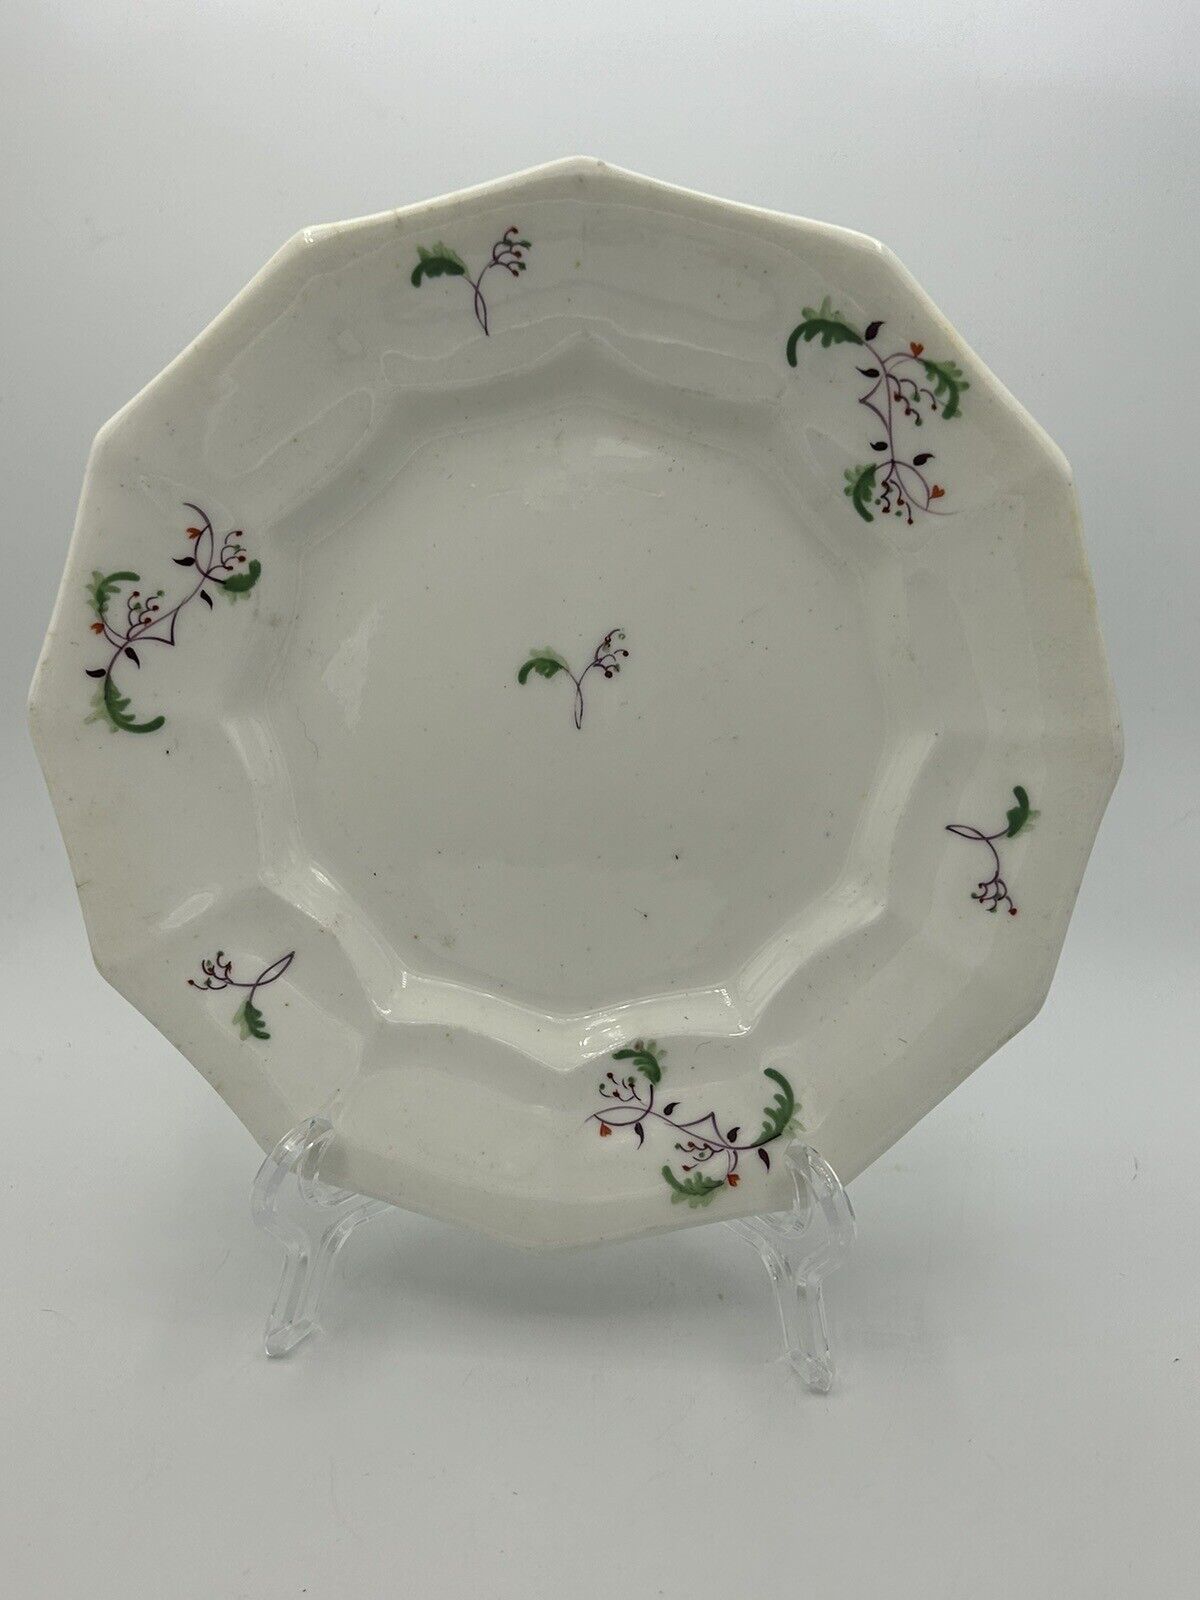 Nine (9) Antique Sprigware/Leaf & Berry 7inch Plate - Hand Painted